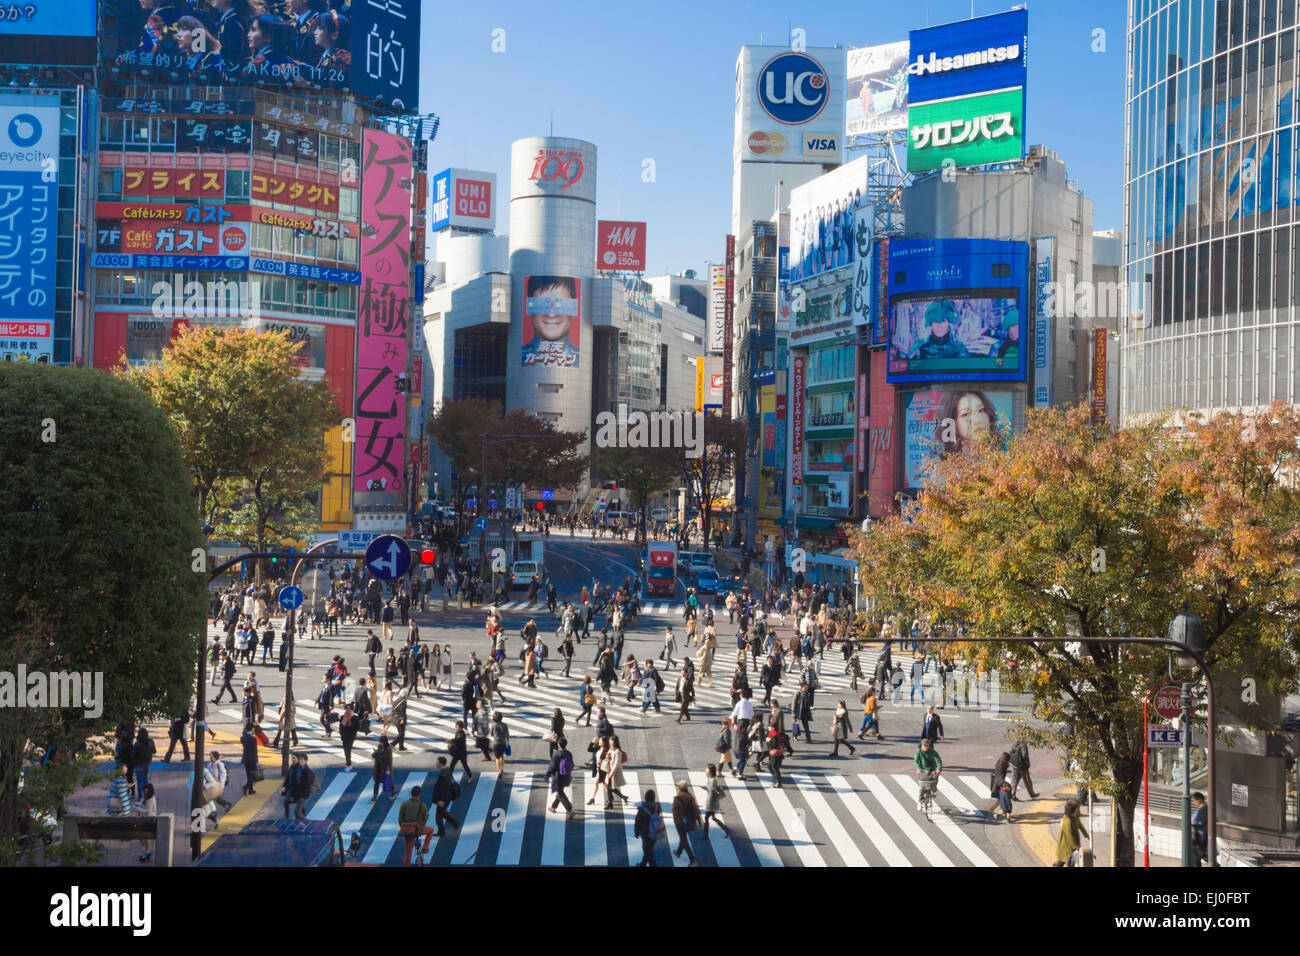 Center, City, Hachiko, Japan, Asia, Tokyo, architecture, autumn, colourful, commercials, advertising, crossing, fall, famous, ped Stock Photo